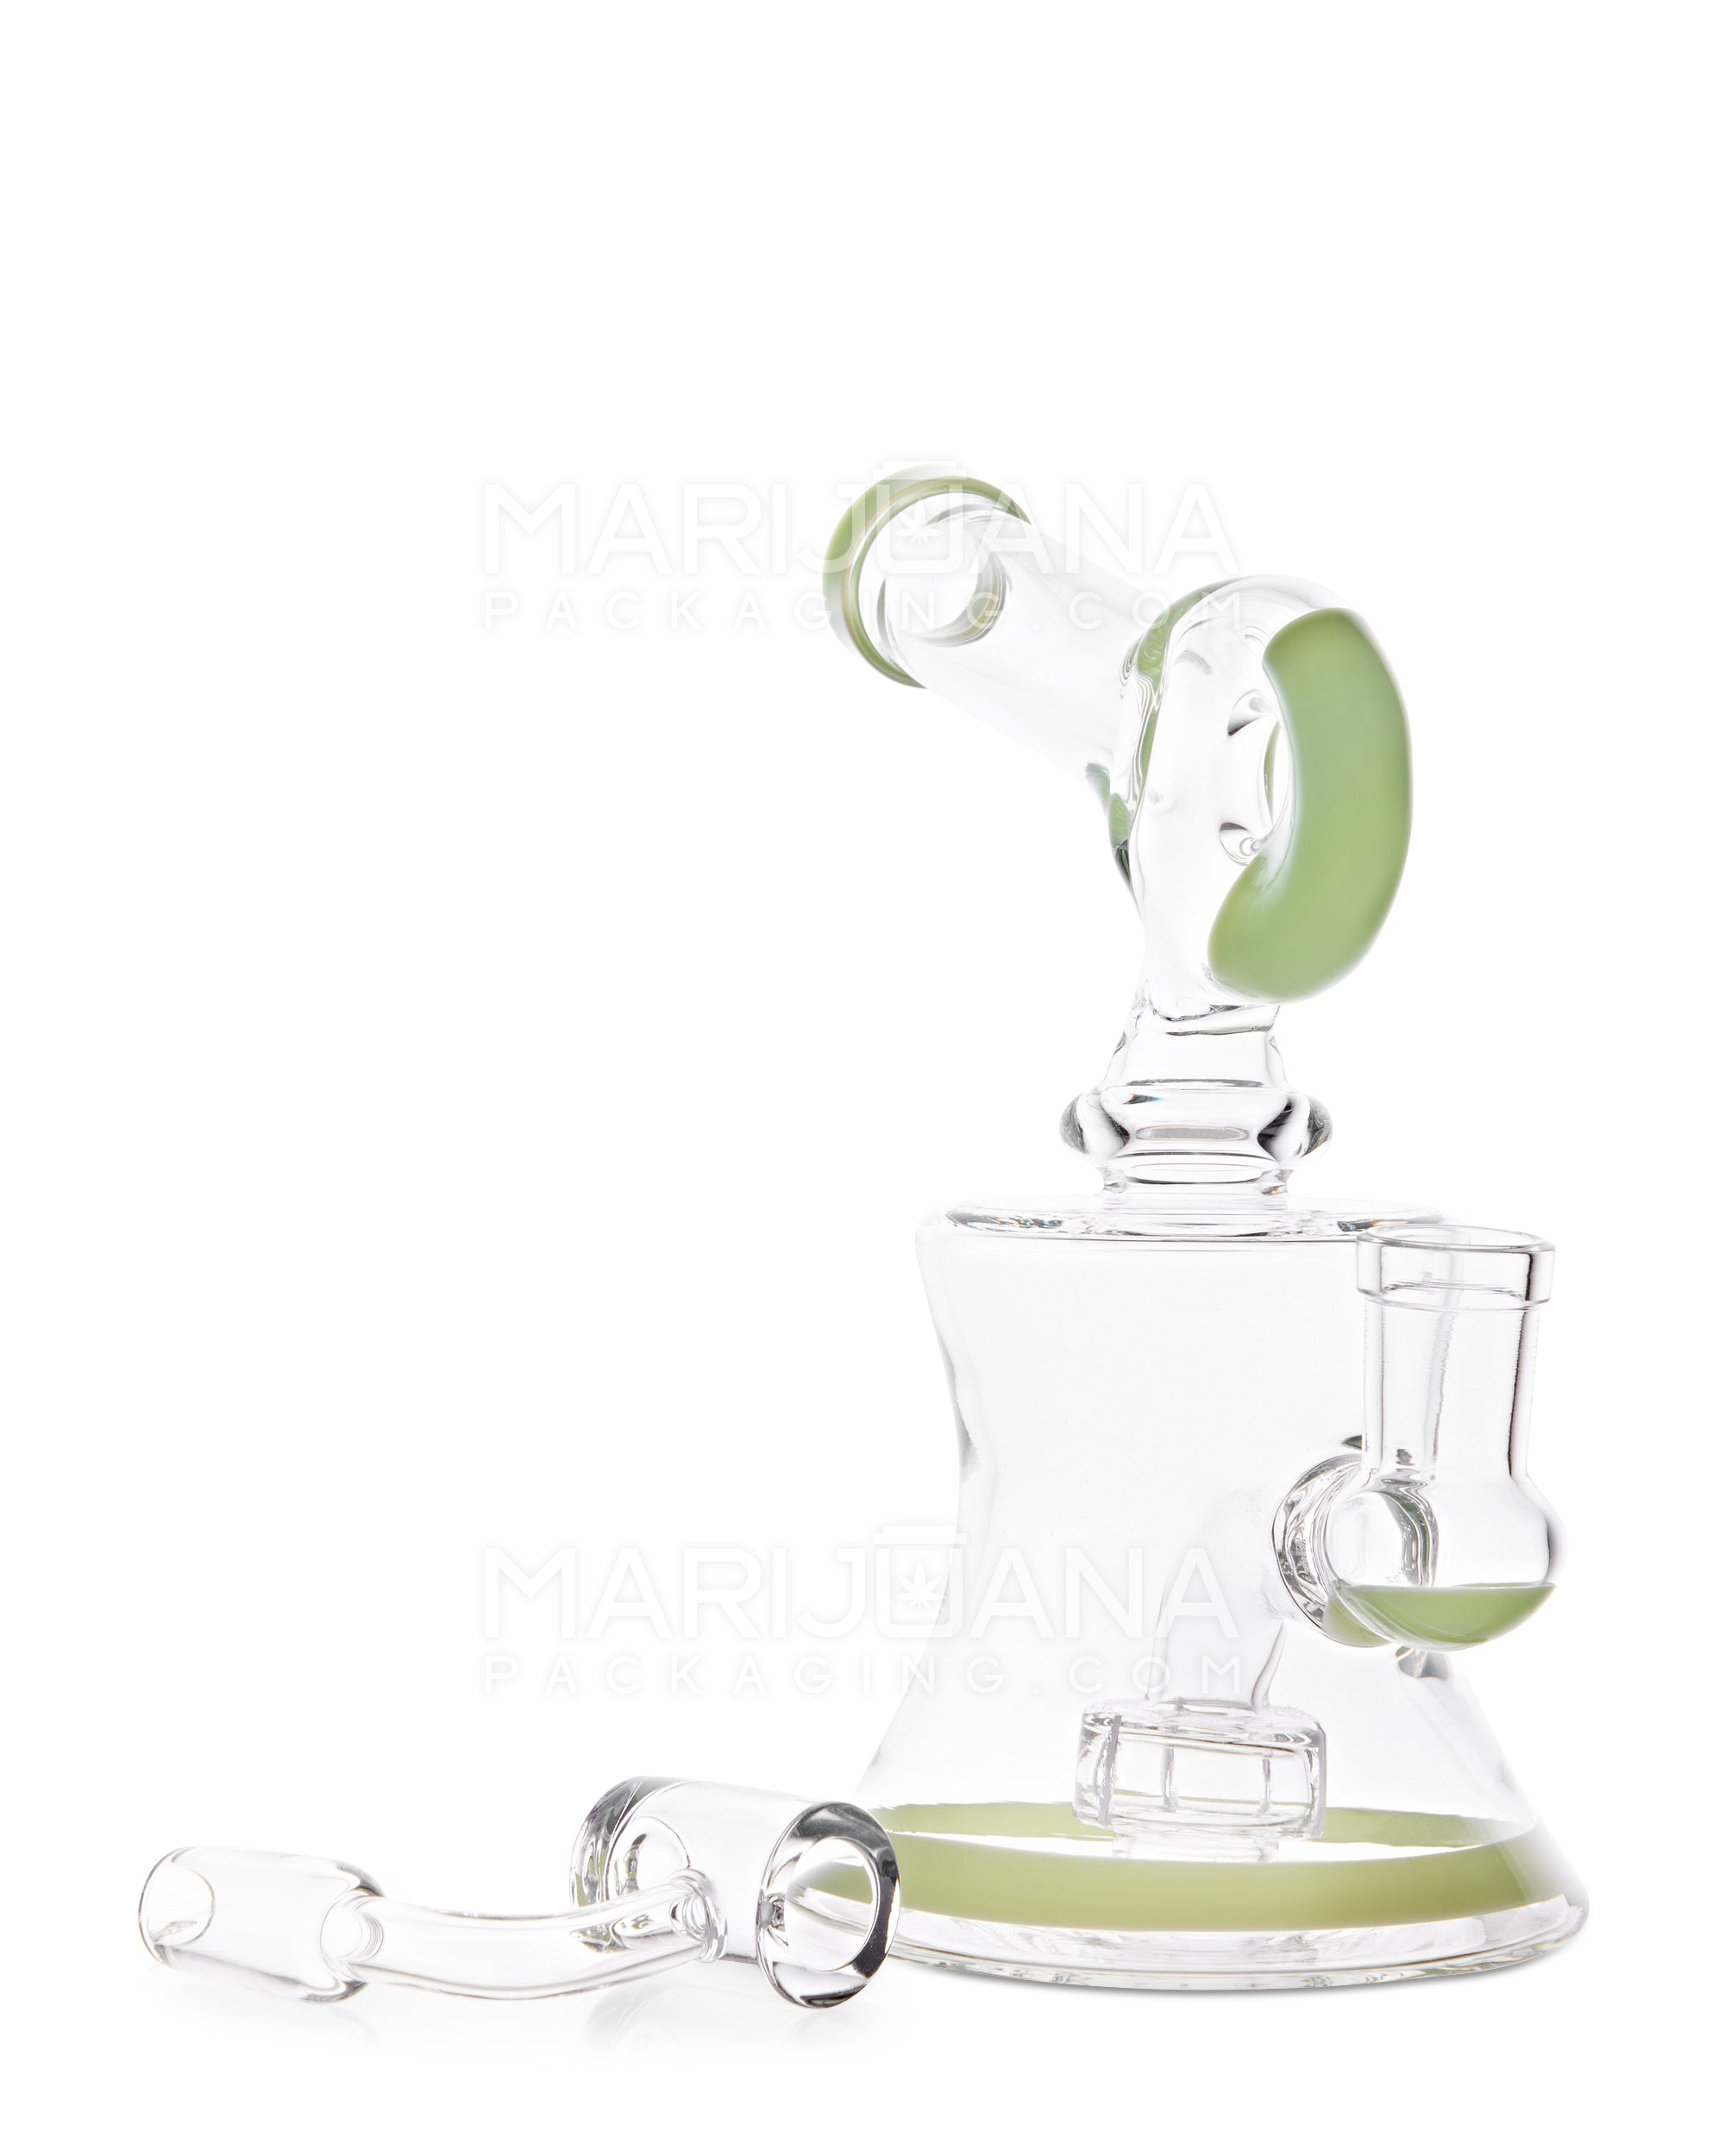 USA Glass | Sidecar Donut Glass Water Pipe w/ Honeycomb Bowl | 6.5in Tall - 14mm Bowl - Green